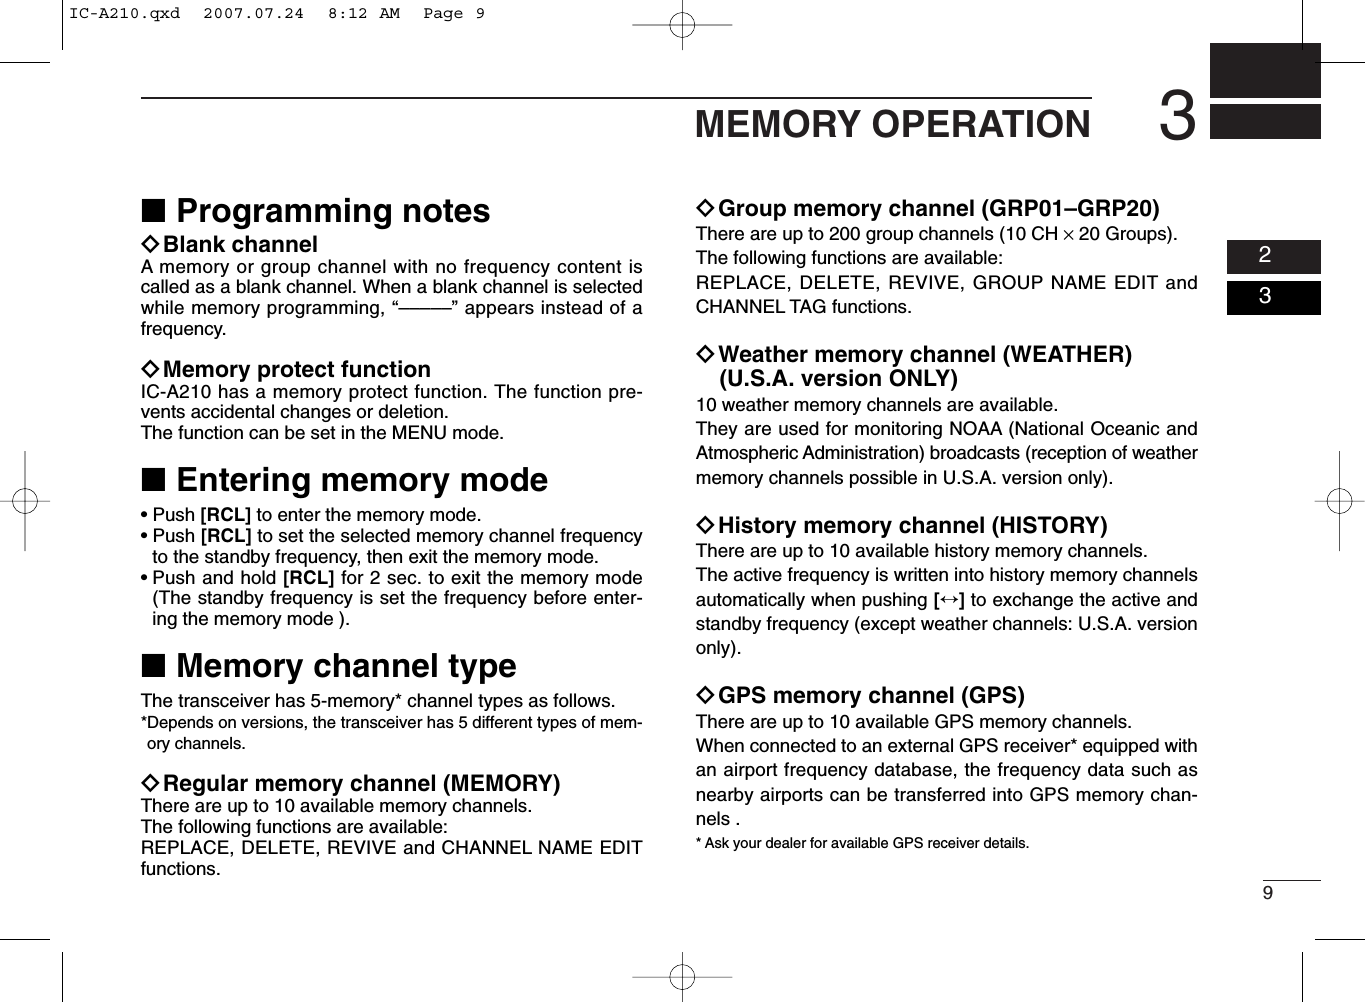 93MEMORY OPERATION0203■Programming notesïBlank channelA memory or group channel with no frequency content iscalled as a blank channel. When a blank channel is selectedwhile memory programming, “–––––” appears instead of afrequency.ïMemory protect functionIC-A210 has a memory protect function. The function pre-vents accidental changes or deletion.The function can be set in the MENU mode.■Entering memory mode• Push [RCL] to enter the memory mode.• Push [RCL] to set the selected memory channel frequencyto the standby frequency, then exit the memory mode.• Push and hold [RCL] for 2 sec. to exit the memory mode(The standby frequency is set the frequency before enter-ing the memory mode ).■Memory channel typeThe transceiver has 5-memory* channel types as follows.*Depends on versions, the transceiver has 5 different types of mem-ory channels.ïRegular memory channel (MEMORY)There are up to 10 available memory channels. The following functions are available:REPLACE, DELETE, REVIVE and CHANNEL NAME EDITfunctions.ïGroup memory channel (GRP01–GRP20)There are up to 200 group channels (10 CH ×20 Groups).The following functions are available:REPLACE, DELETE, REVIVE, GROUP NAME EDIT andCHANNEL TAG functions.ïWeather memory channel (WEATHER)(U.S.A. version ONLY)10 weather memory channels are available. They are used for monitoring NOAA (National Oceanic andAtmospheric Administration) broadcasts (reception of weathermemory channels possible in U.S.A. version only).ïHistory memory channel (HISTORY)There are up to 10 available history memory channels. The active frequency is written into history memory channelsautomatically when pushing [↔]to exchange the active andstandby frequency (except weather channels: U.S.A. versiononly).ïGPS memory channel (GPS)There are up to 10 available GPS memory channels.When connected to an external GPS receiver* equipped withan airport frequency database, the frequency data such asnearby airports can be transferred into GPS memory chan-nels .* Ask your dealer for available GPS receiver details.IC-A210.qxd  2007.07.24  8:12 AM  Page 9